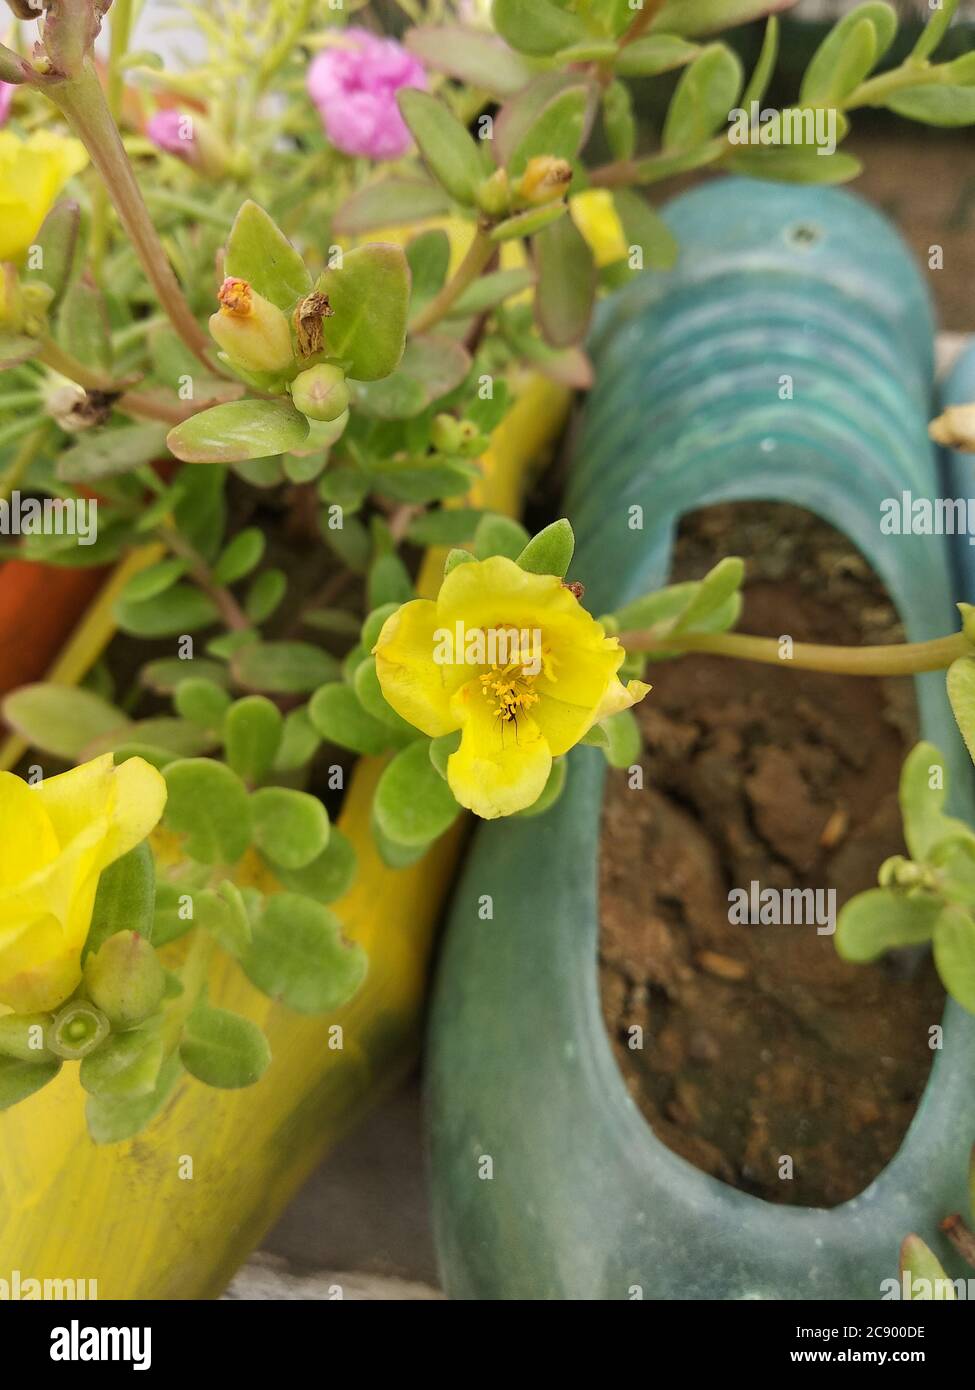 Portulaca grandiflora (Portulaca, Moss Rose, Sun plant, Sun Rose) ; A colorful blossom, petals stacked overlapping in layers which variable and multi- Stock Photo